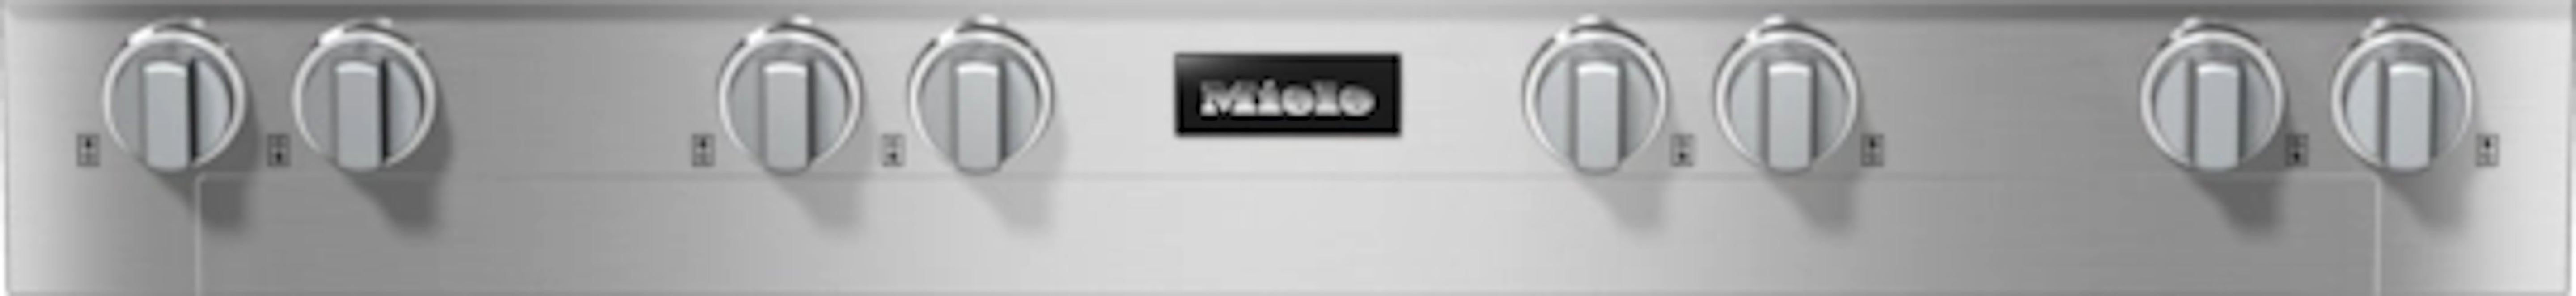 Miele - 48 Inch Gas Cooktop in Stainless - KMR1354-3G